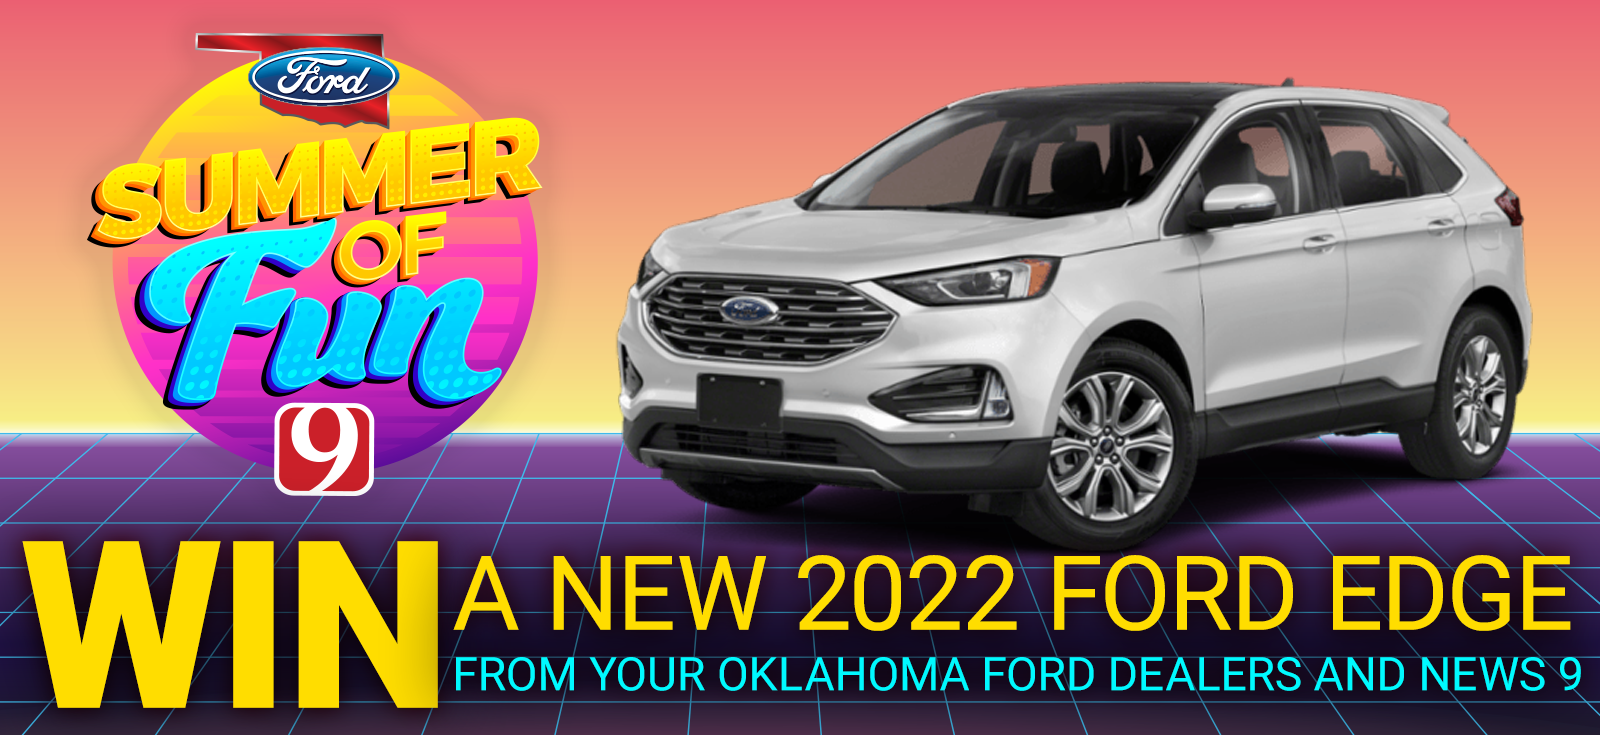 Win a 2022 FORD EDGE from News 9